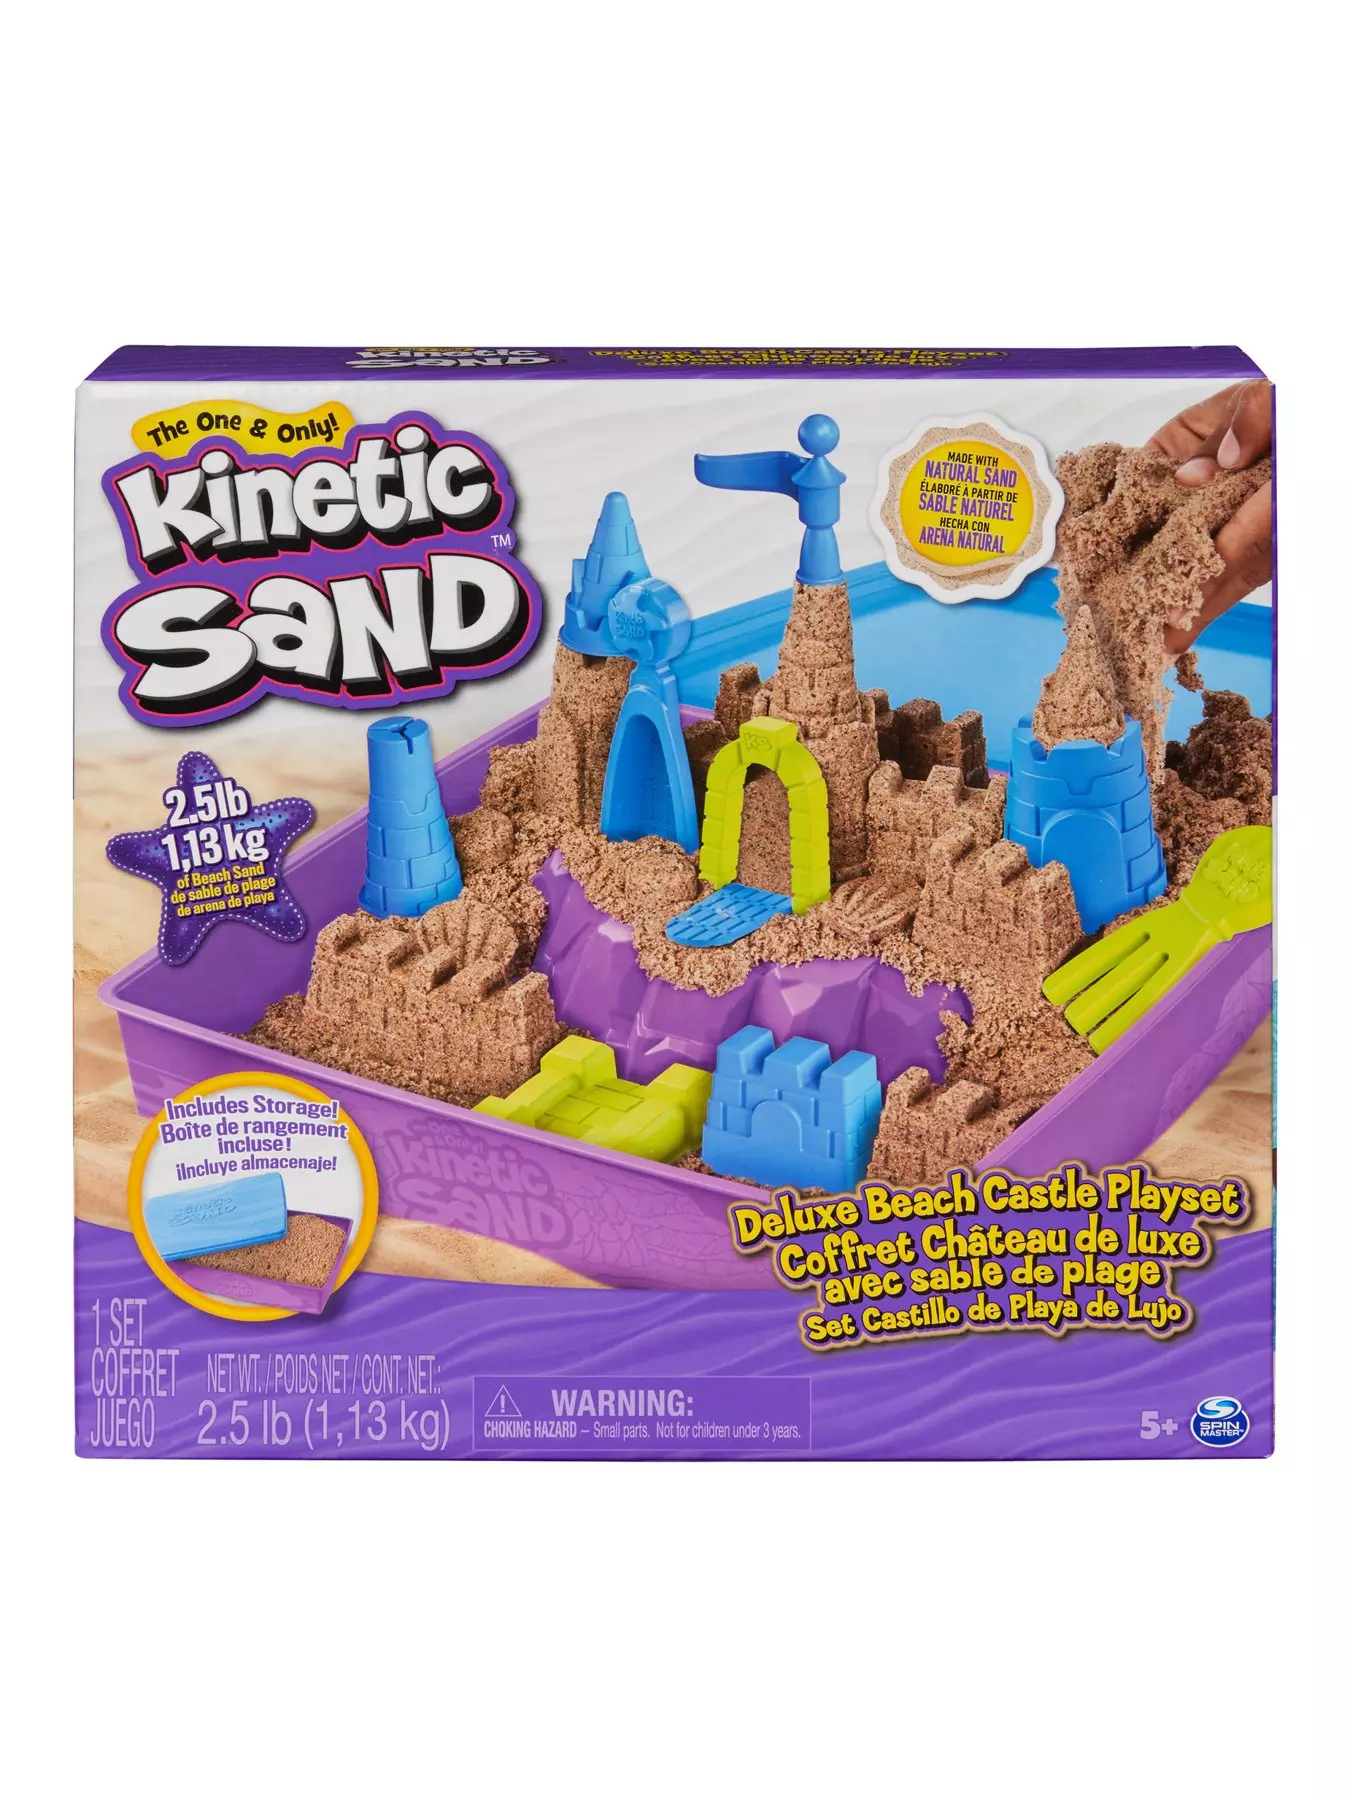 Kinetic sand, Brand store